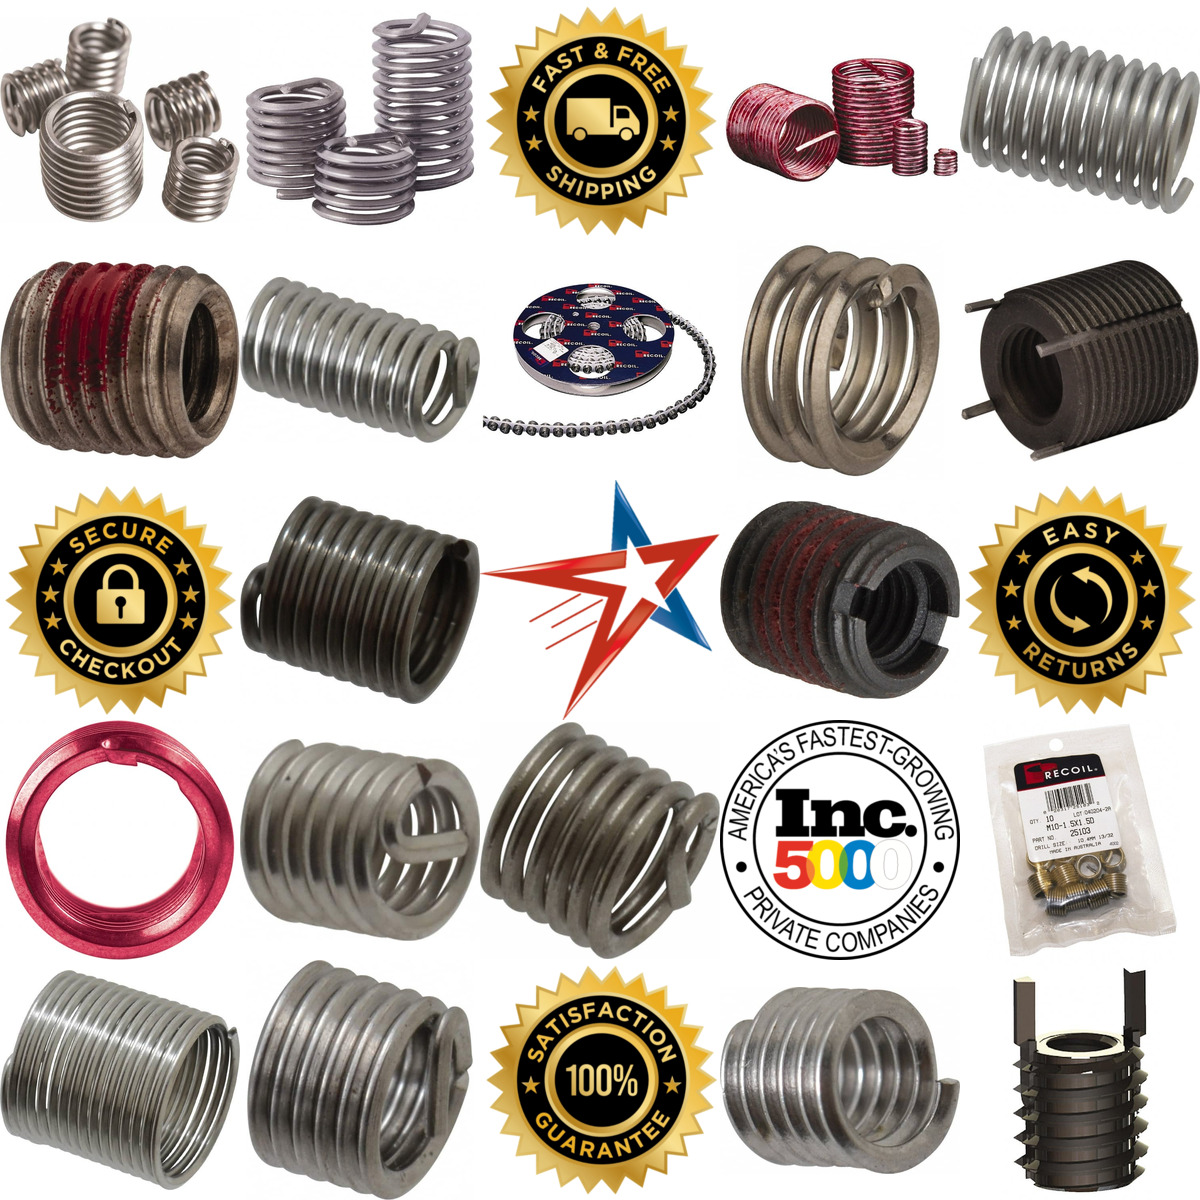 A selection of Threaded Inserts products on GoVets